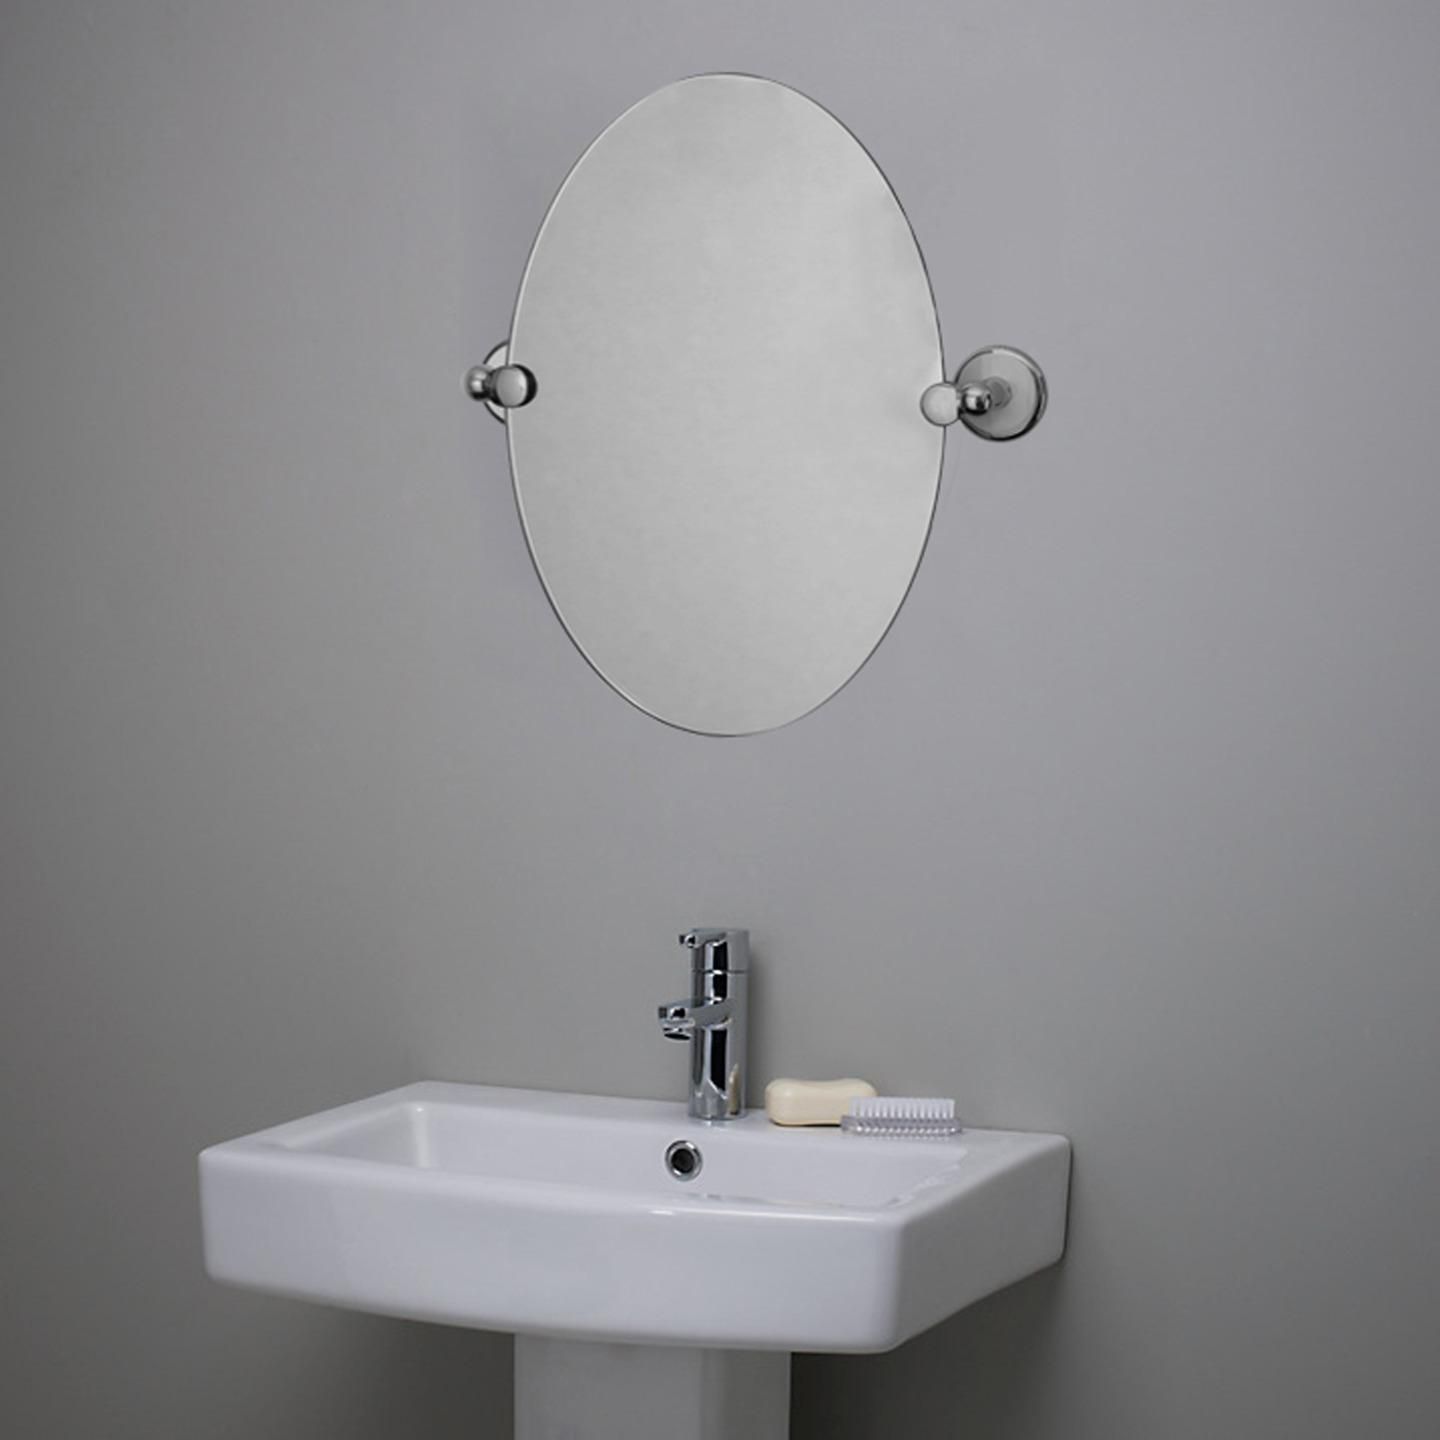 Croydex Islington Oval Frameless Bathroom Mirror Chrome/white Wall Pertaining To Ceiling Hung Oval Mirrors (View 3 of 15)